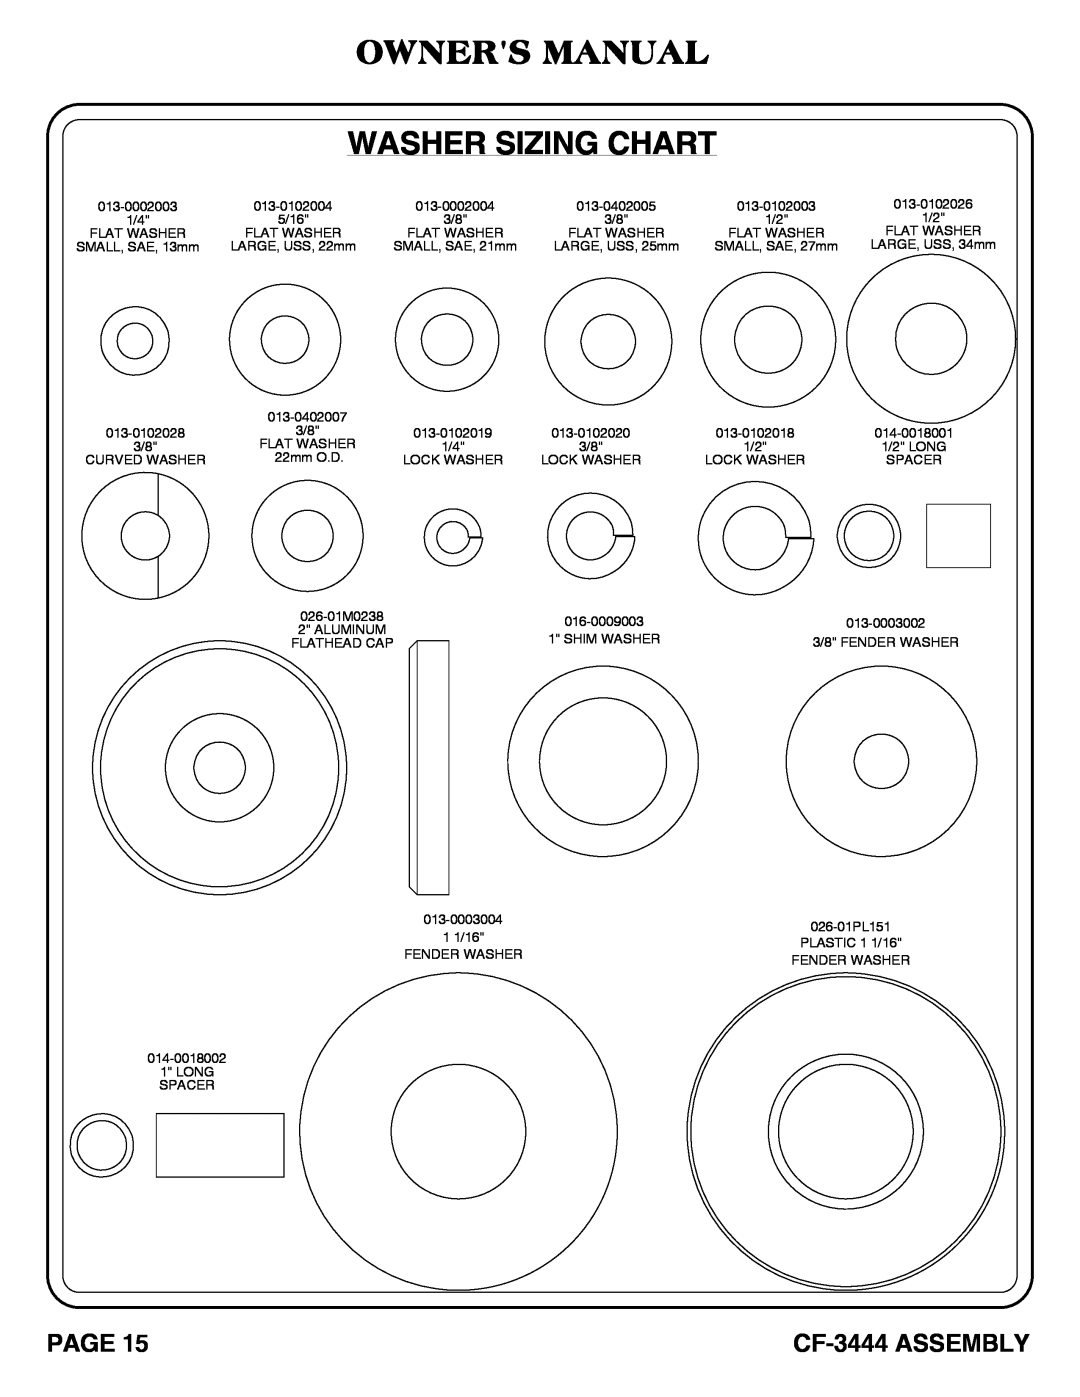 Hoist Fitness cf-3444 owner manual Owners Manual Washer Sizing Chart, CF-3444 ASSEMBLY 